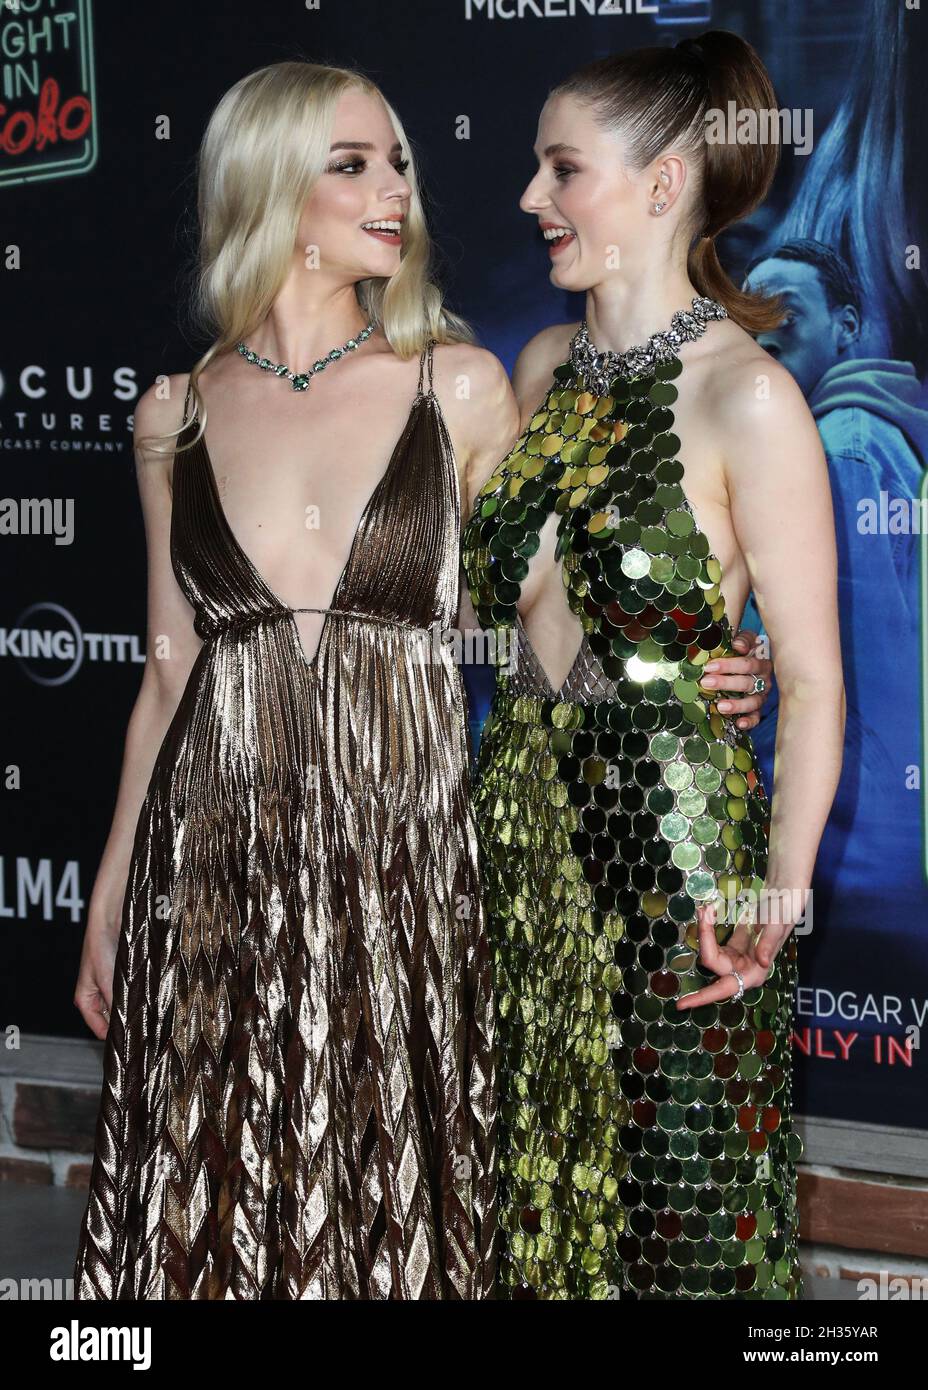 Los Angeles, United States. 25th Oct, 2021. LOS ANGELES, CALIFORNIA, USA - OCTOBER 25: Actresses Anya Taylor-Joy and Thomasin McKenzie arrive at the Los Angeles Premiere Of Focus Features' 'Last Night In Soho' held at the Academy Museum of Motion Pictures on October 25, 2021 in Los Angeles, California, United States. (Photo by Xavier Collin/Image Press Agency) Credit: Image Press Agency/Alamy Live News Stock Photo